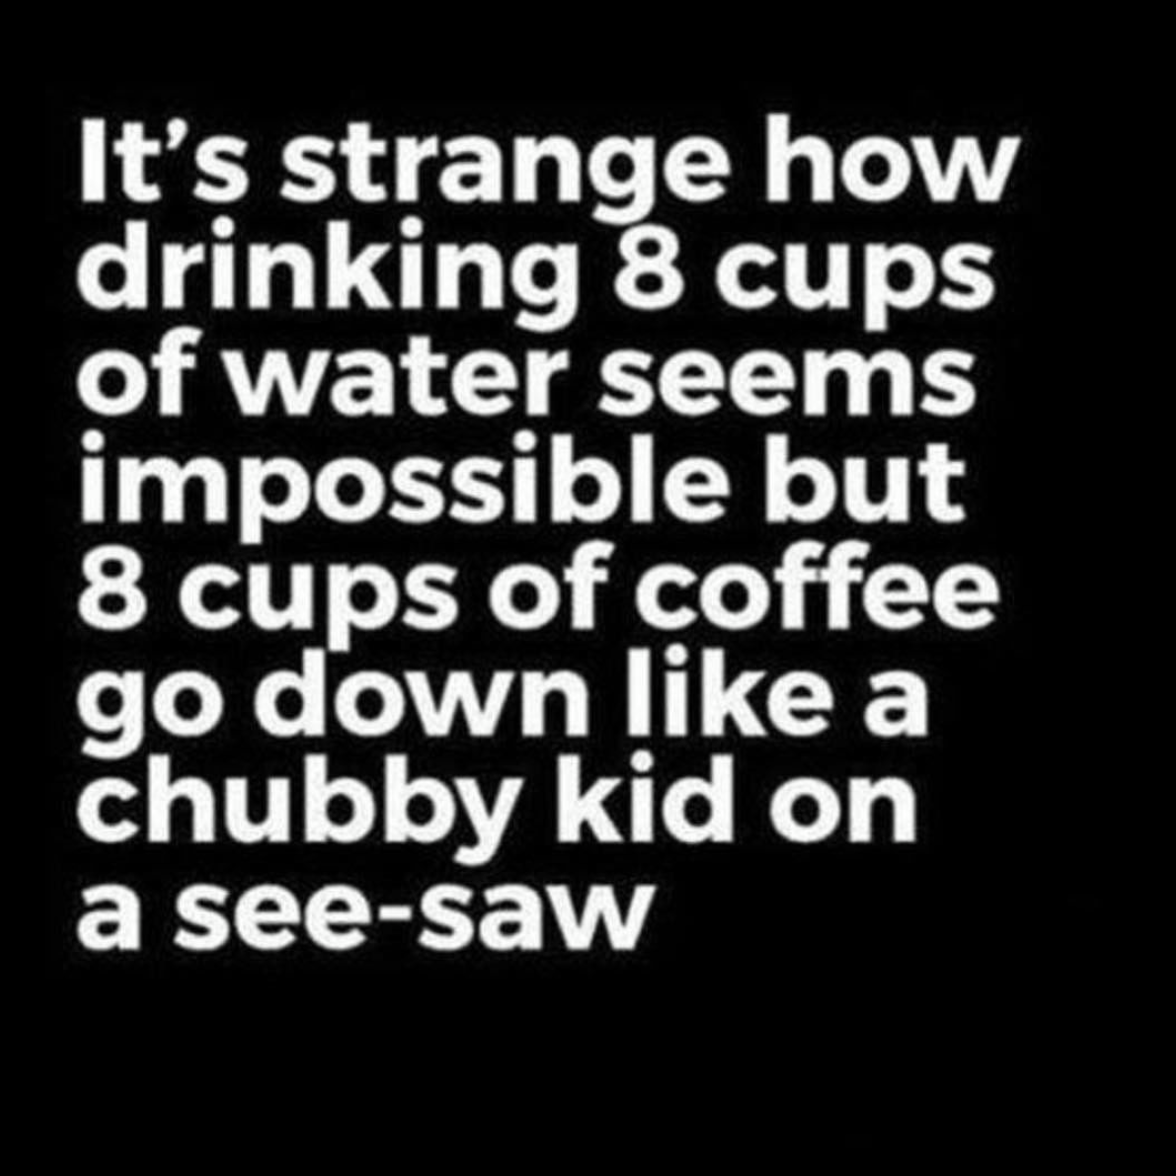 coffee memes - international strange sayings funny - It's strange how drinking 8 cups of water seems impossible but 8 cups of coffee go down a chubby kid on a seesaw